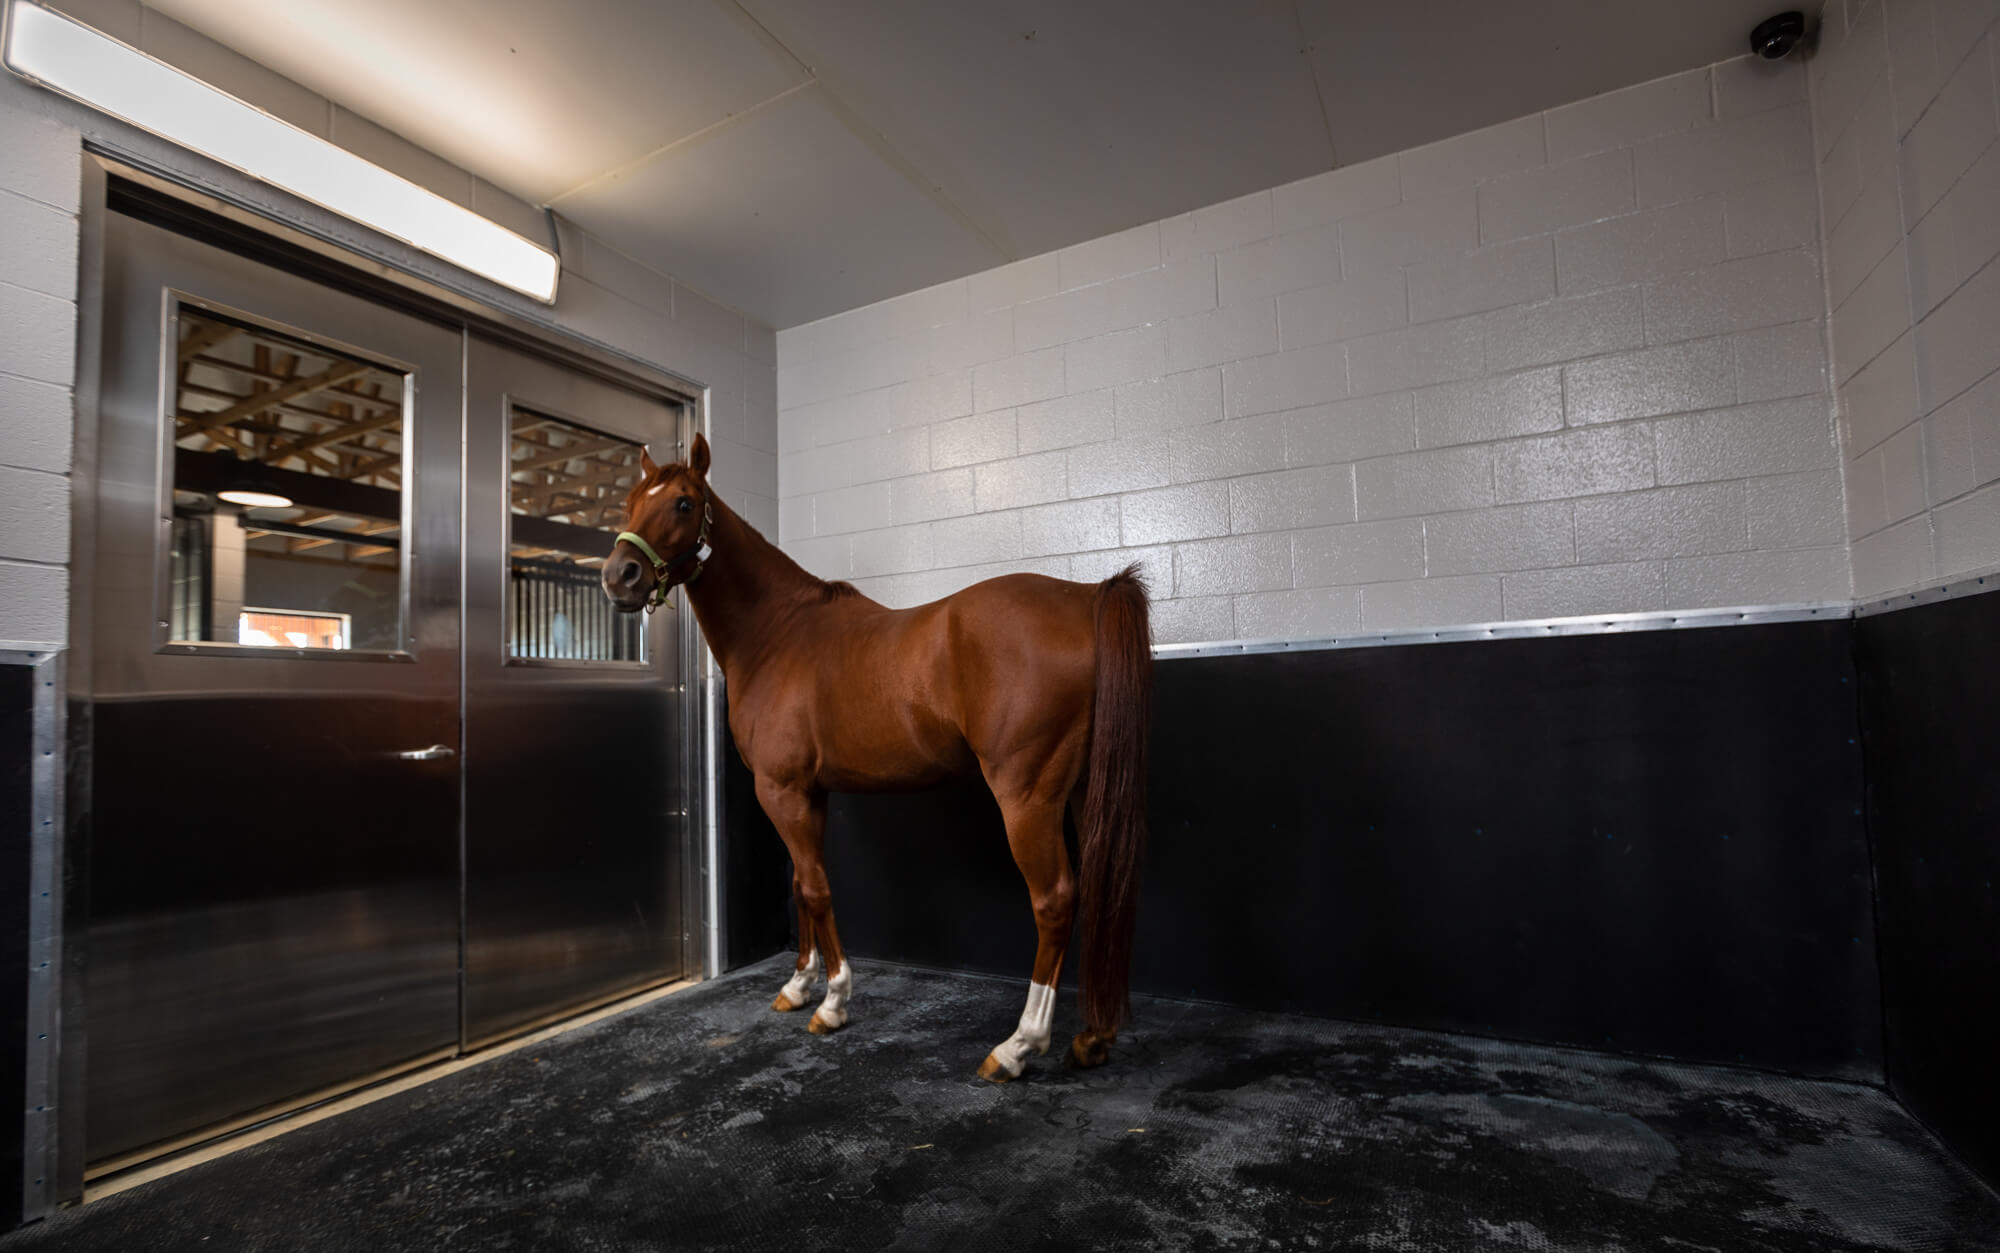 Equine cold saltwater spa therapy is used to treat multiple conditions. Visit the Foxhall facilities & see for yourself.